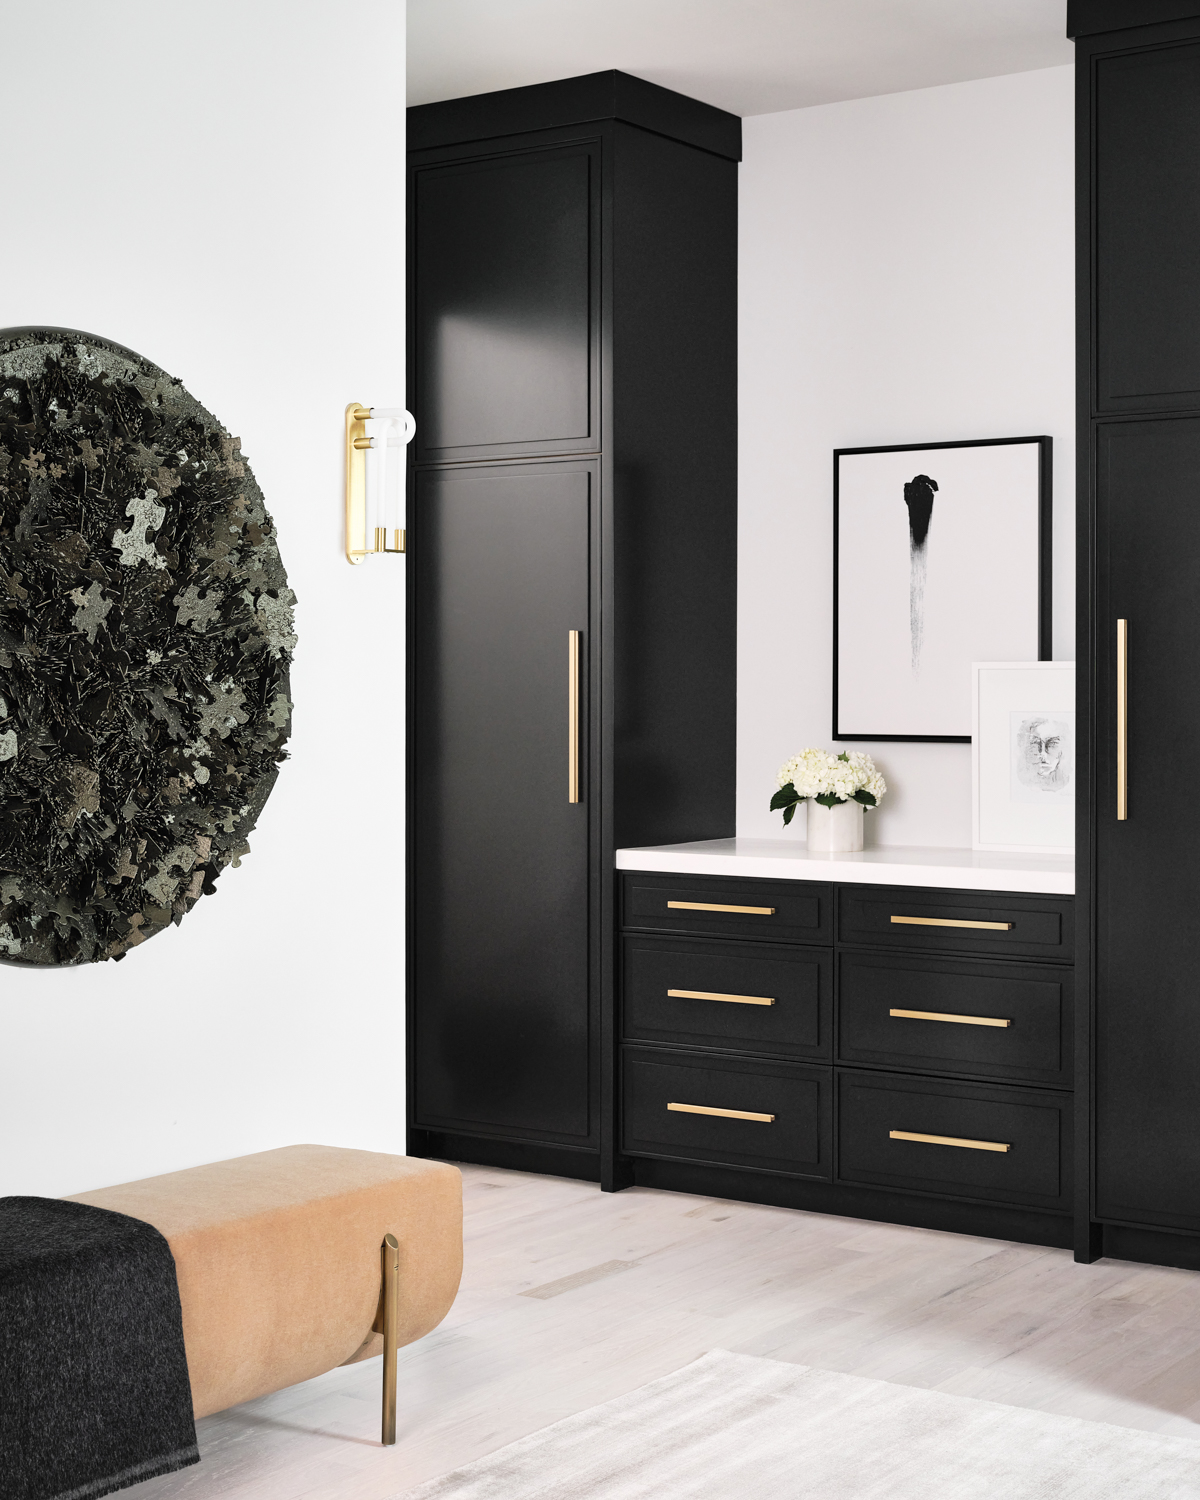 Mudroom with black cabinetry, brass...